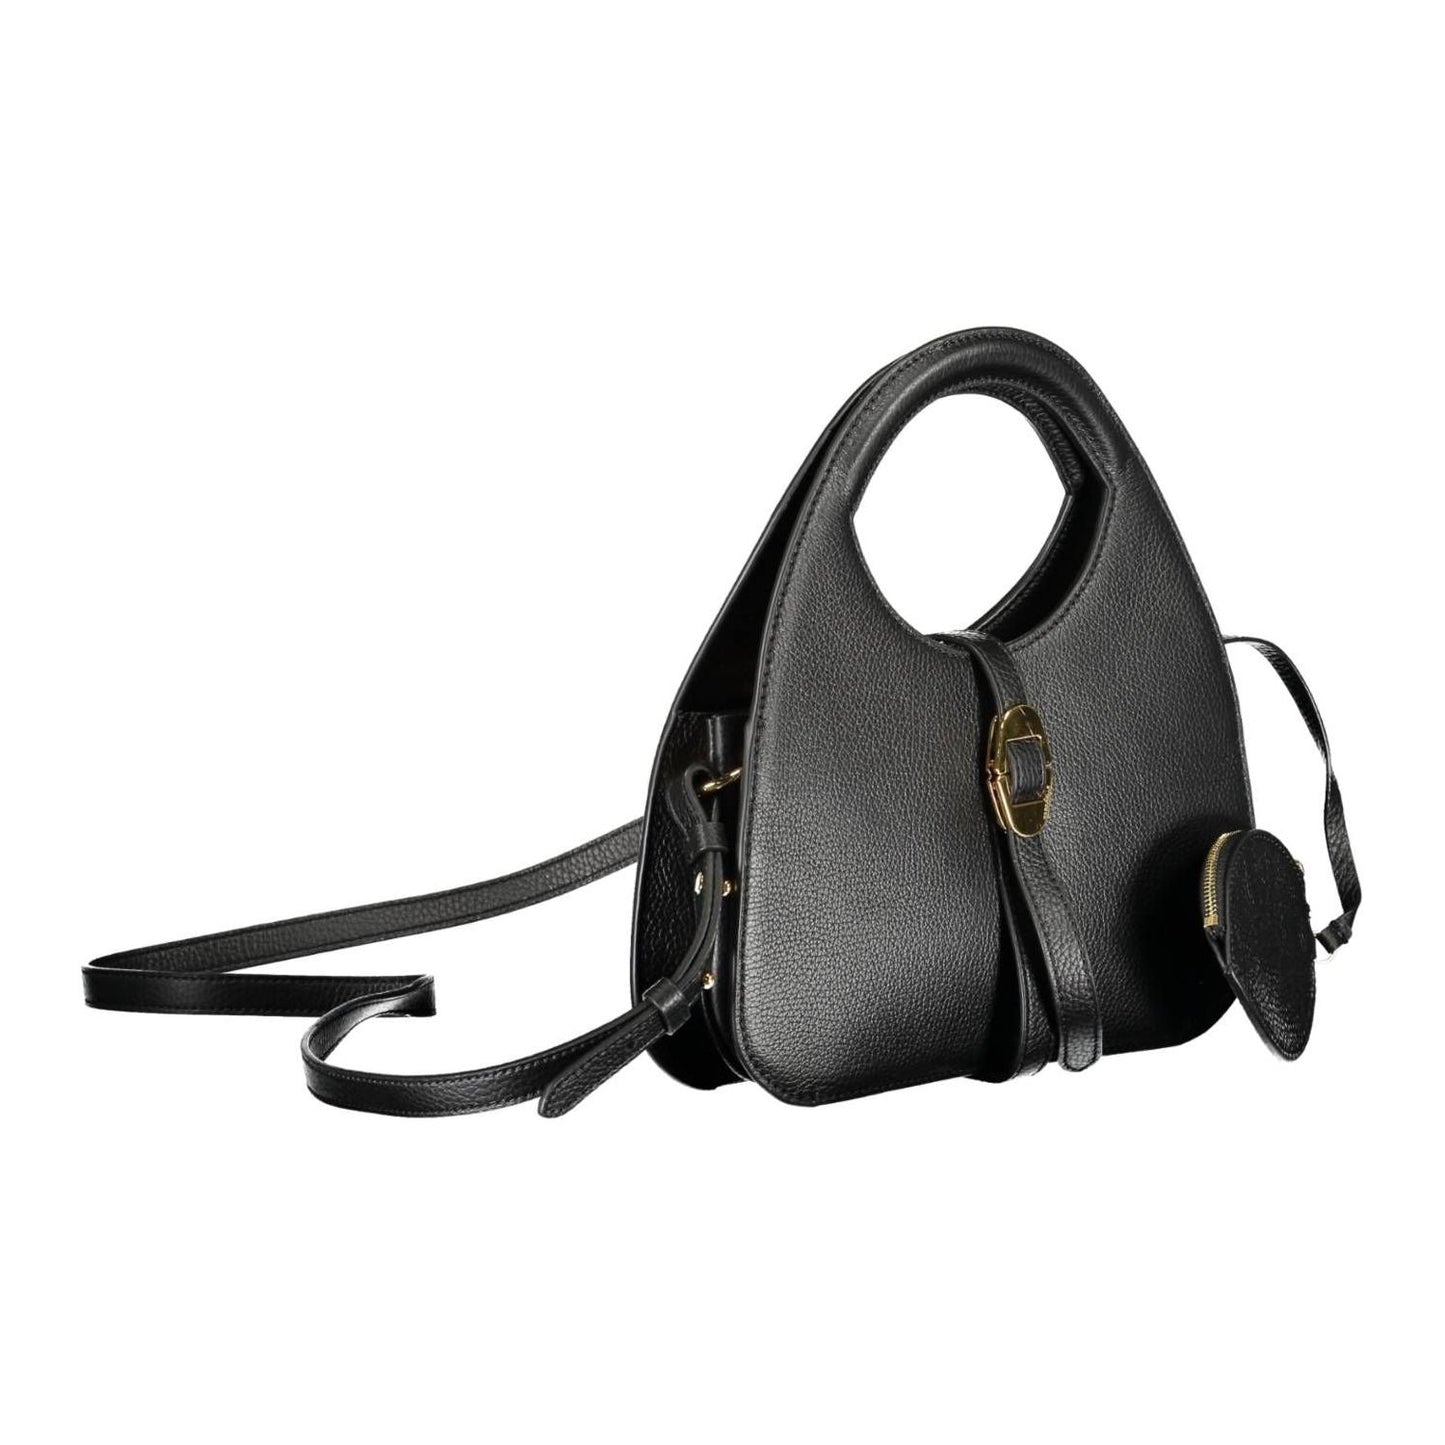 Coccinelle Elegant Duo-Compartment Leather Handbag elegant-duo-compartment-leather-handbag